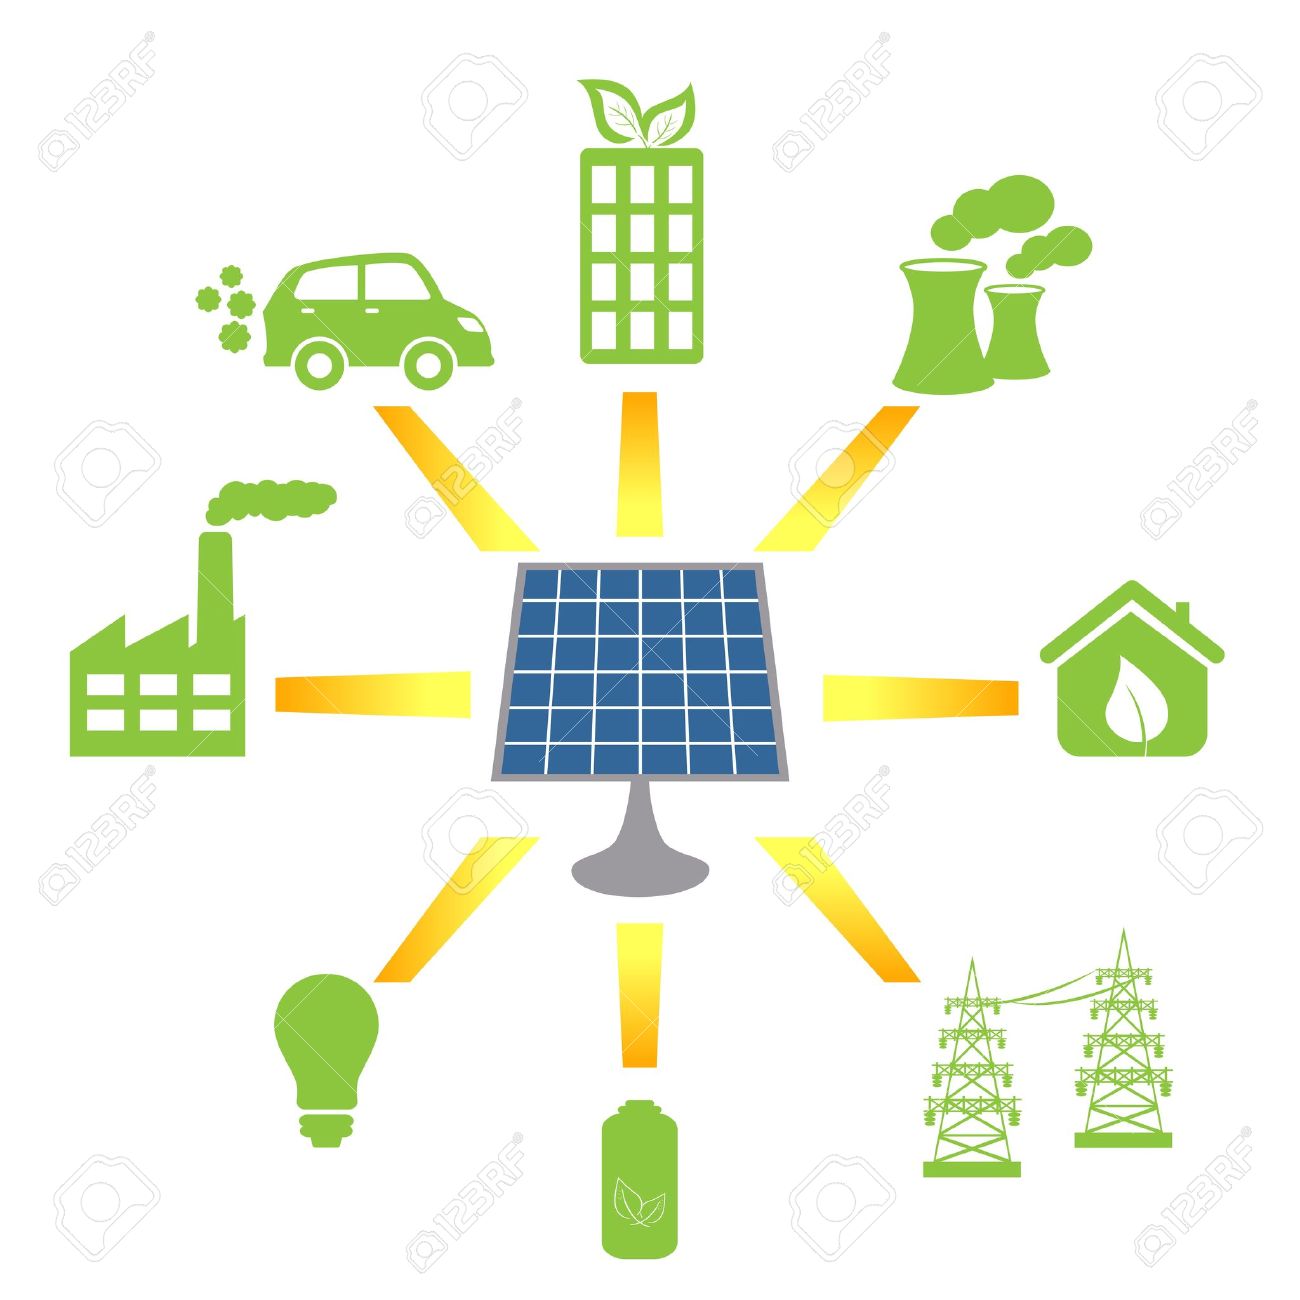 Solar Panel Generating Clean Alternative Energy And Fuel Royalty.